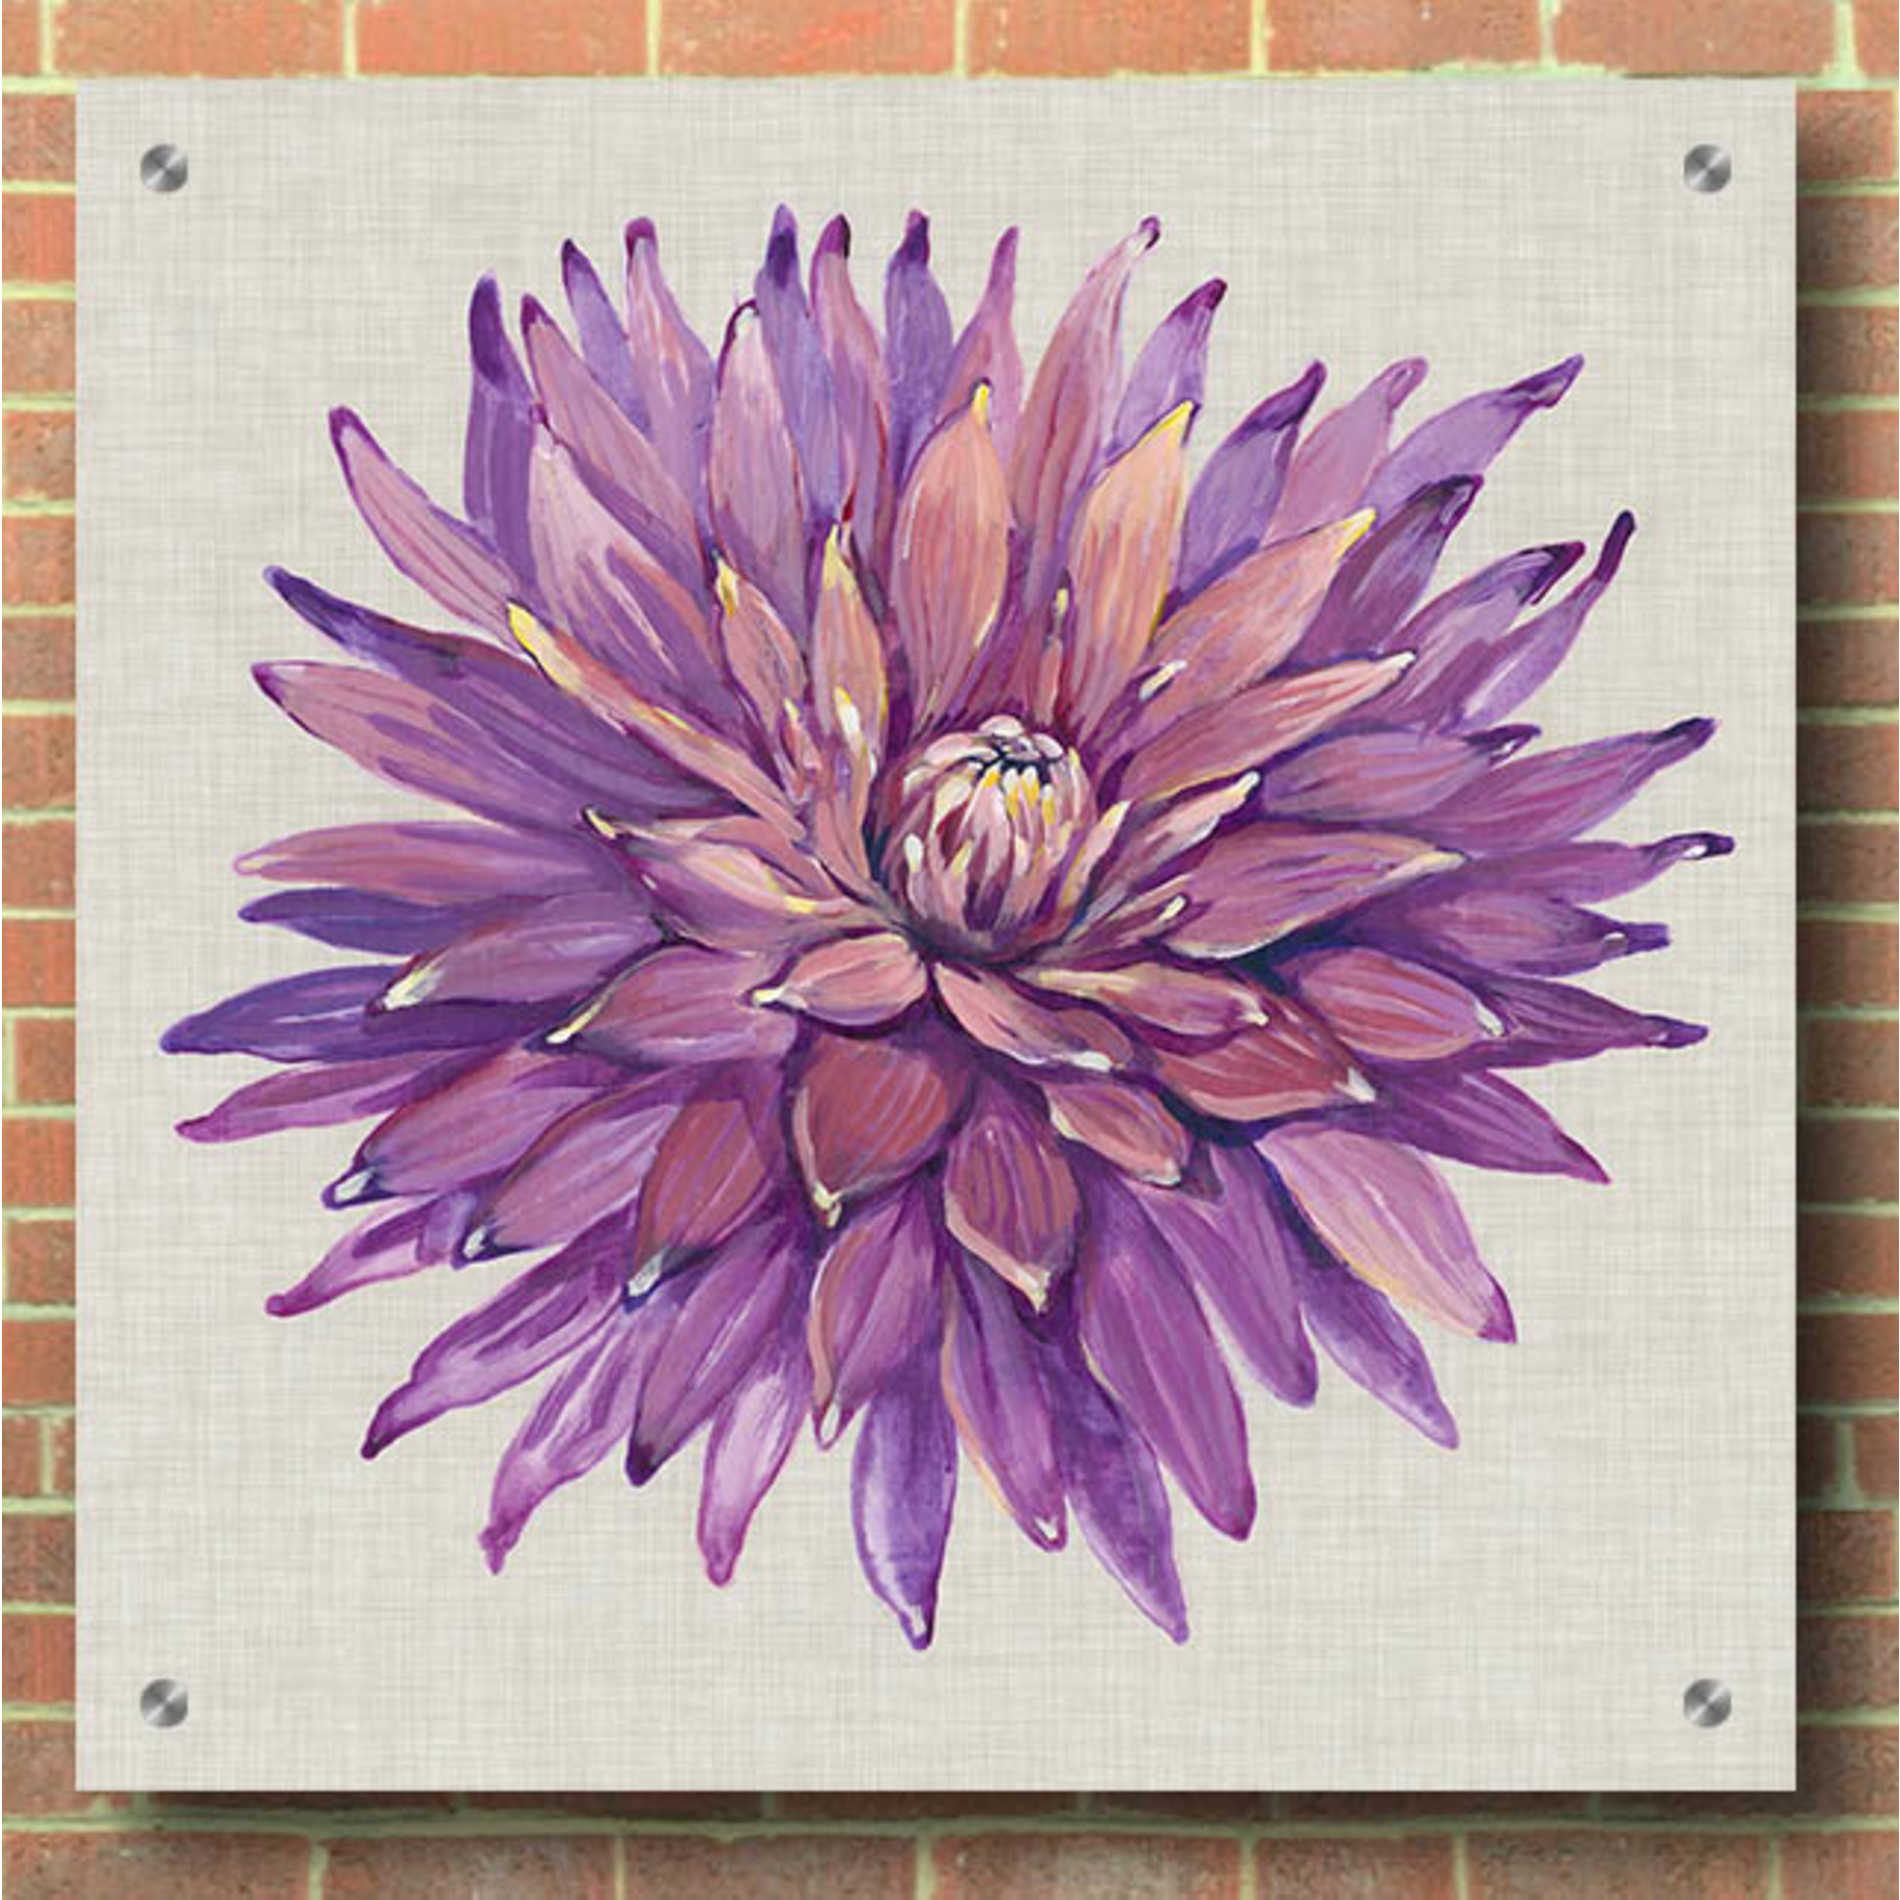 Epic Art 'Floral Portrait on Linen II' by Tim O'Toole, Acrylic Glass Wall Art,36x36